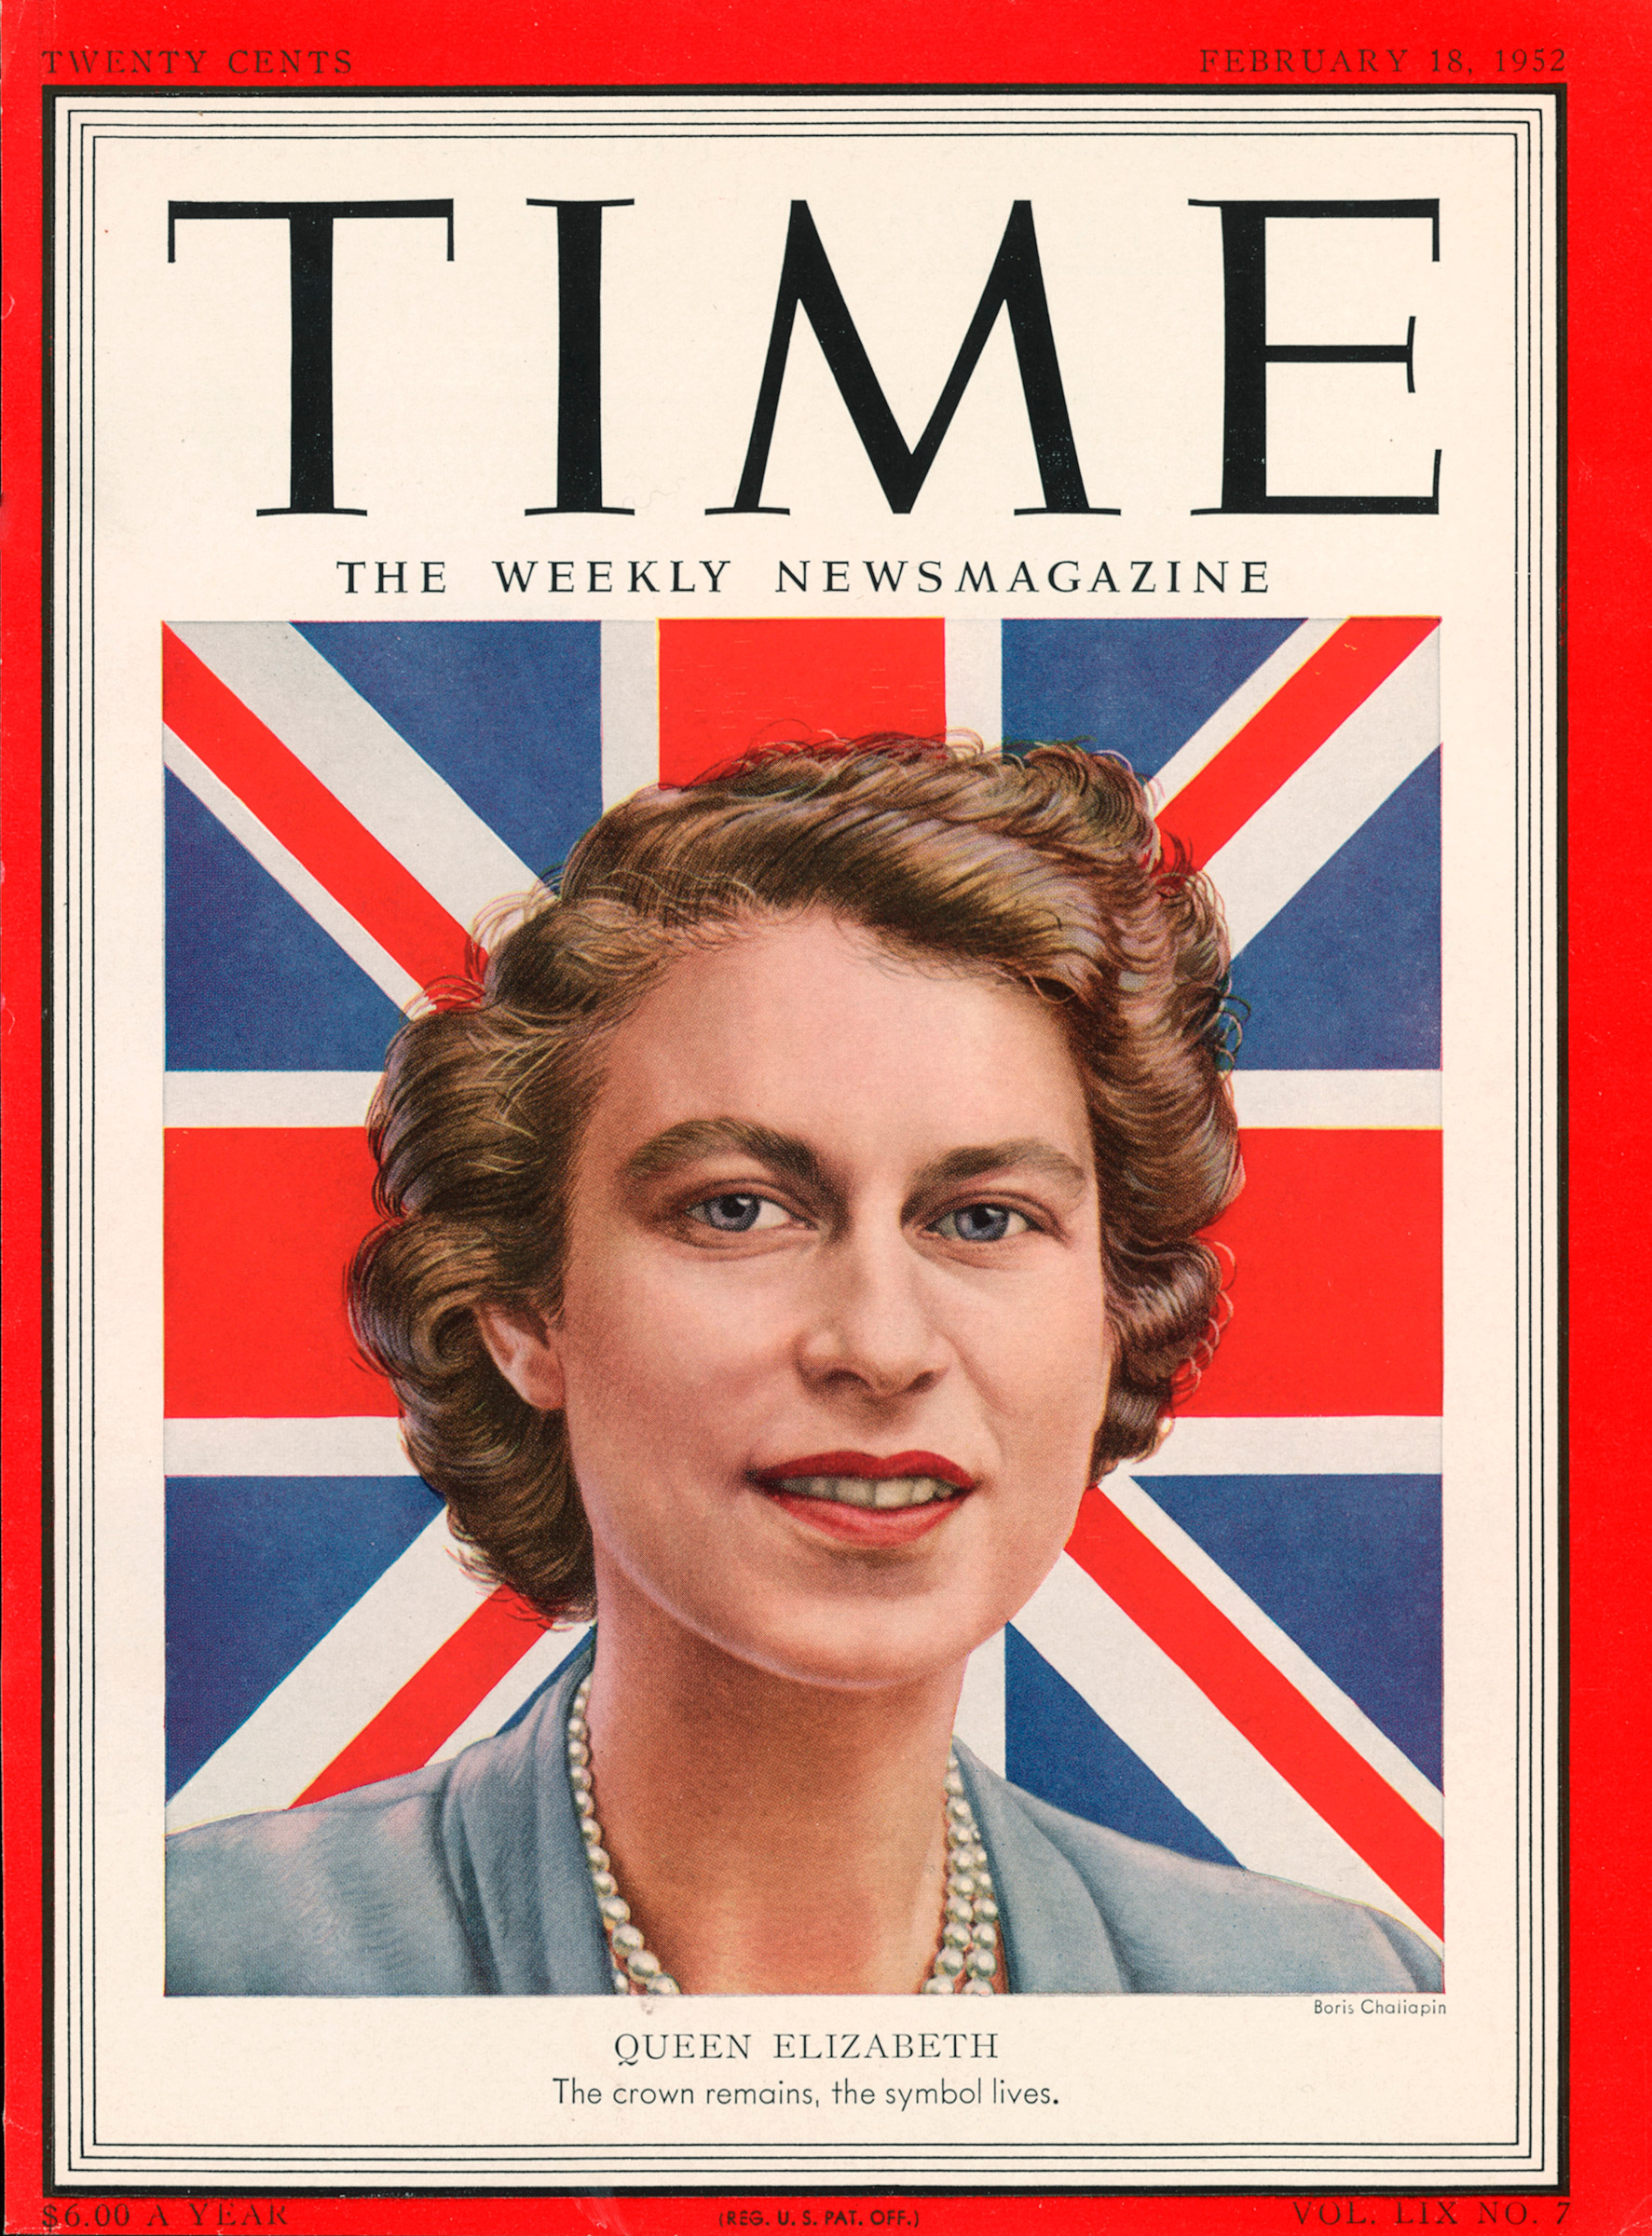 Queen Elizabeth on the Feb. 18, 1952, cover of TIME, following her ascension to the throne